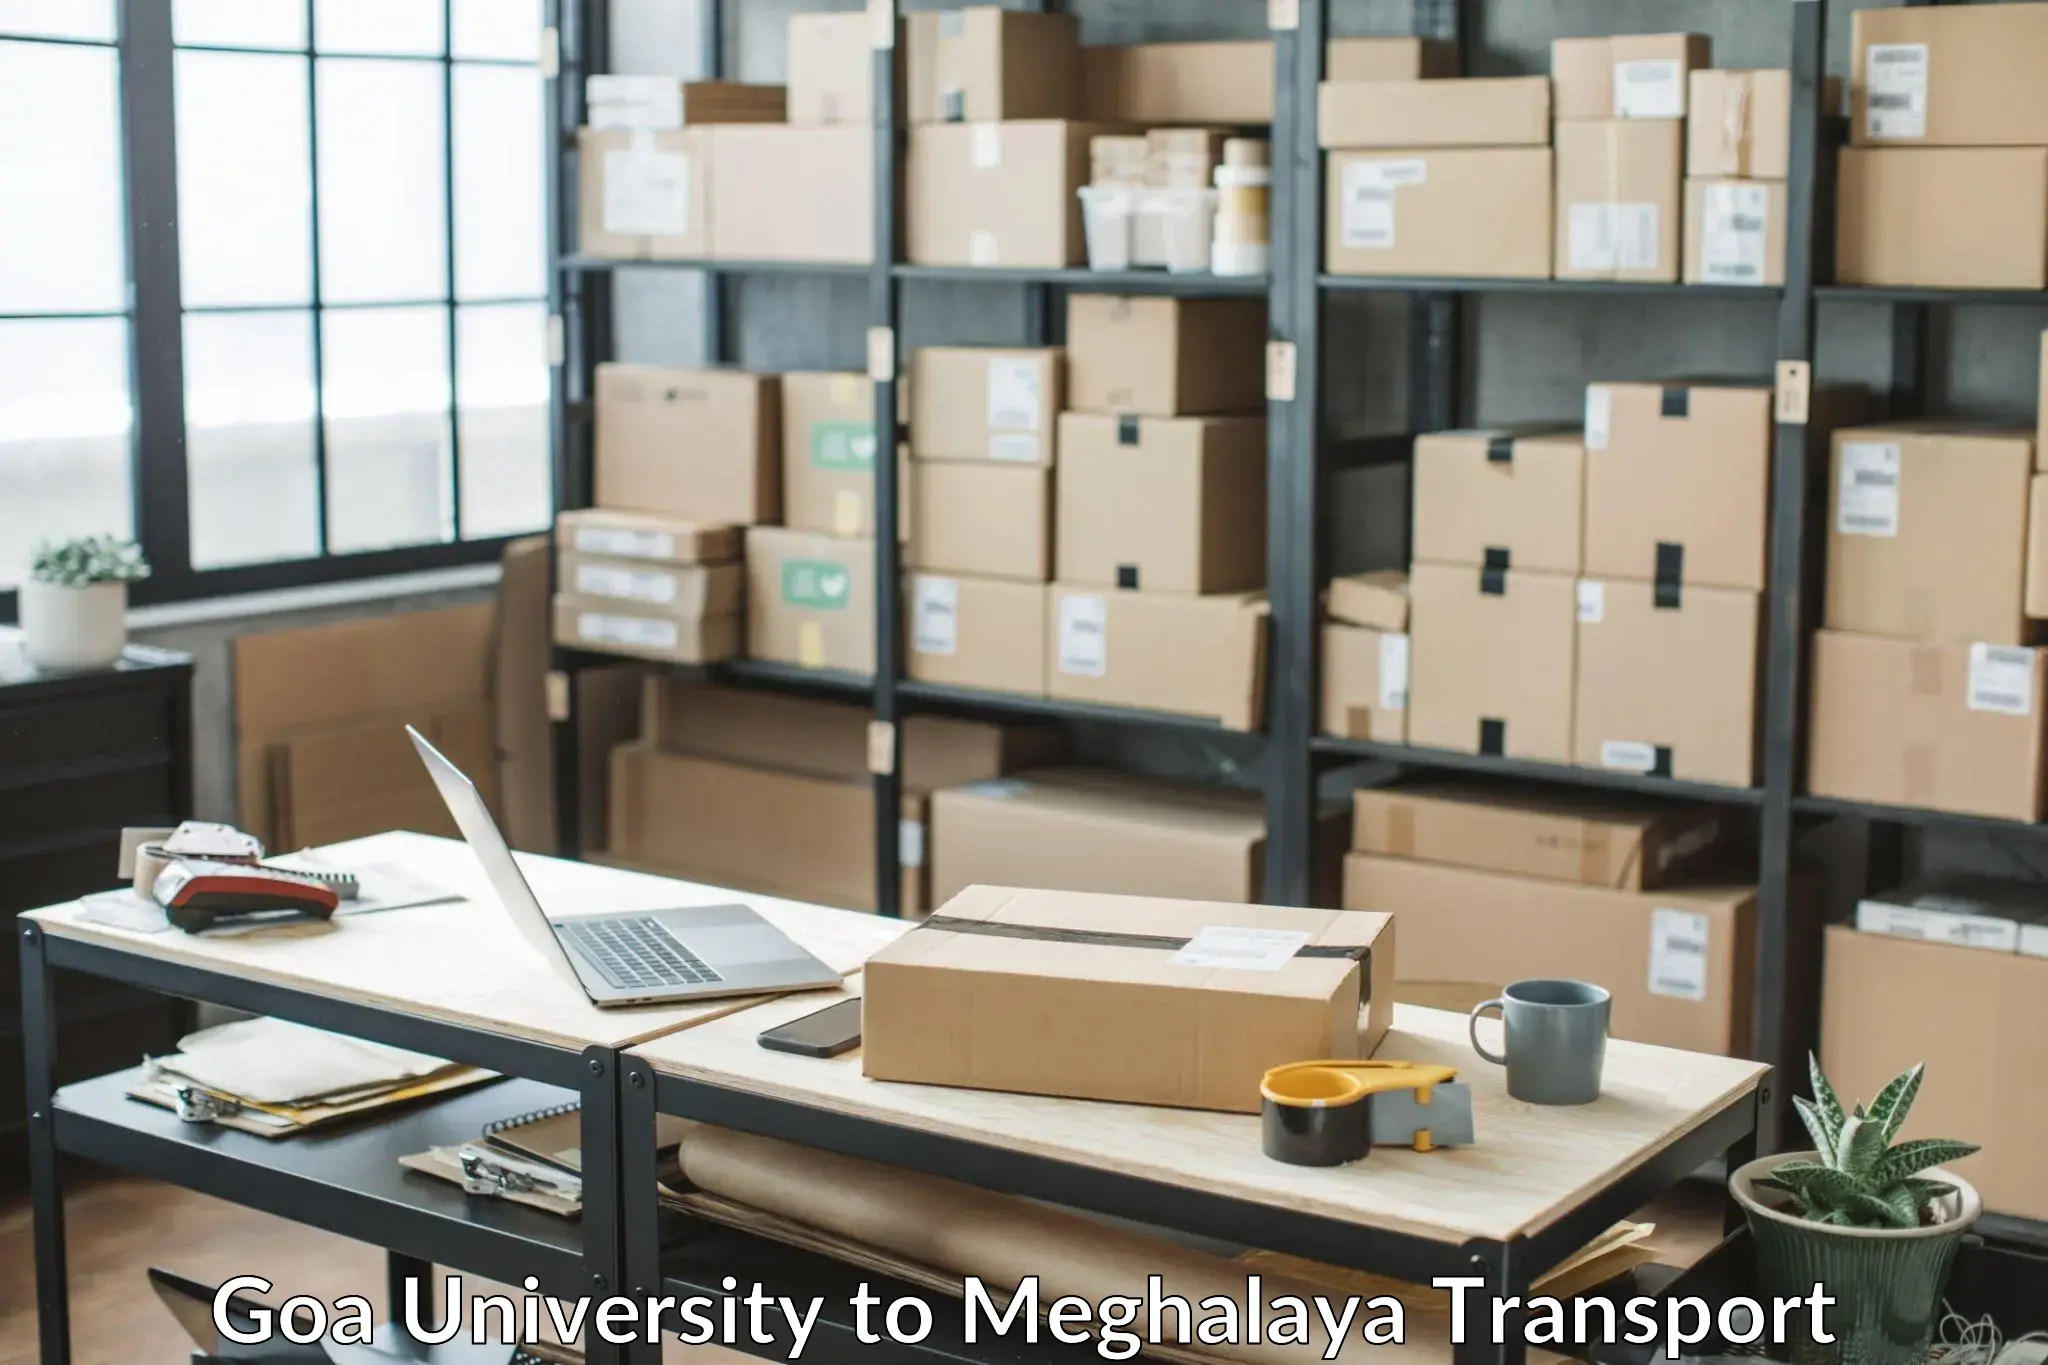 Road transport online services in Goa University to Shillong